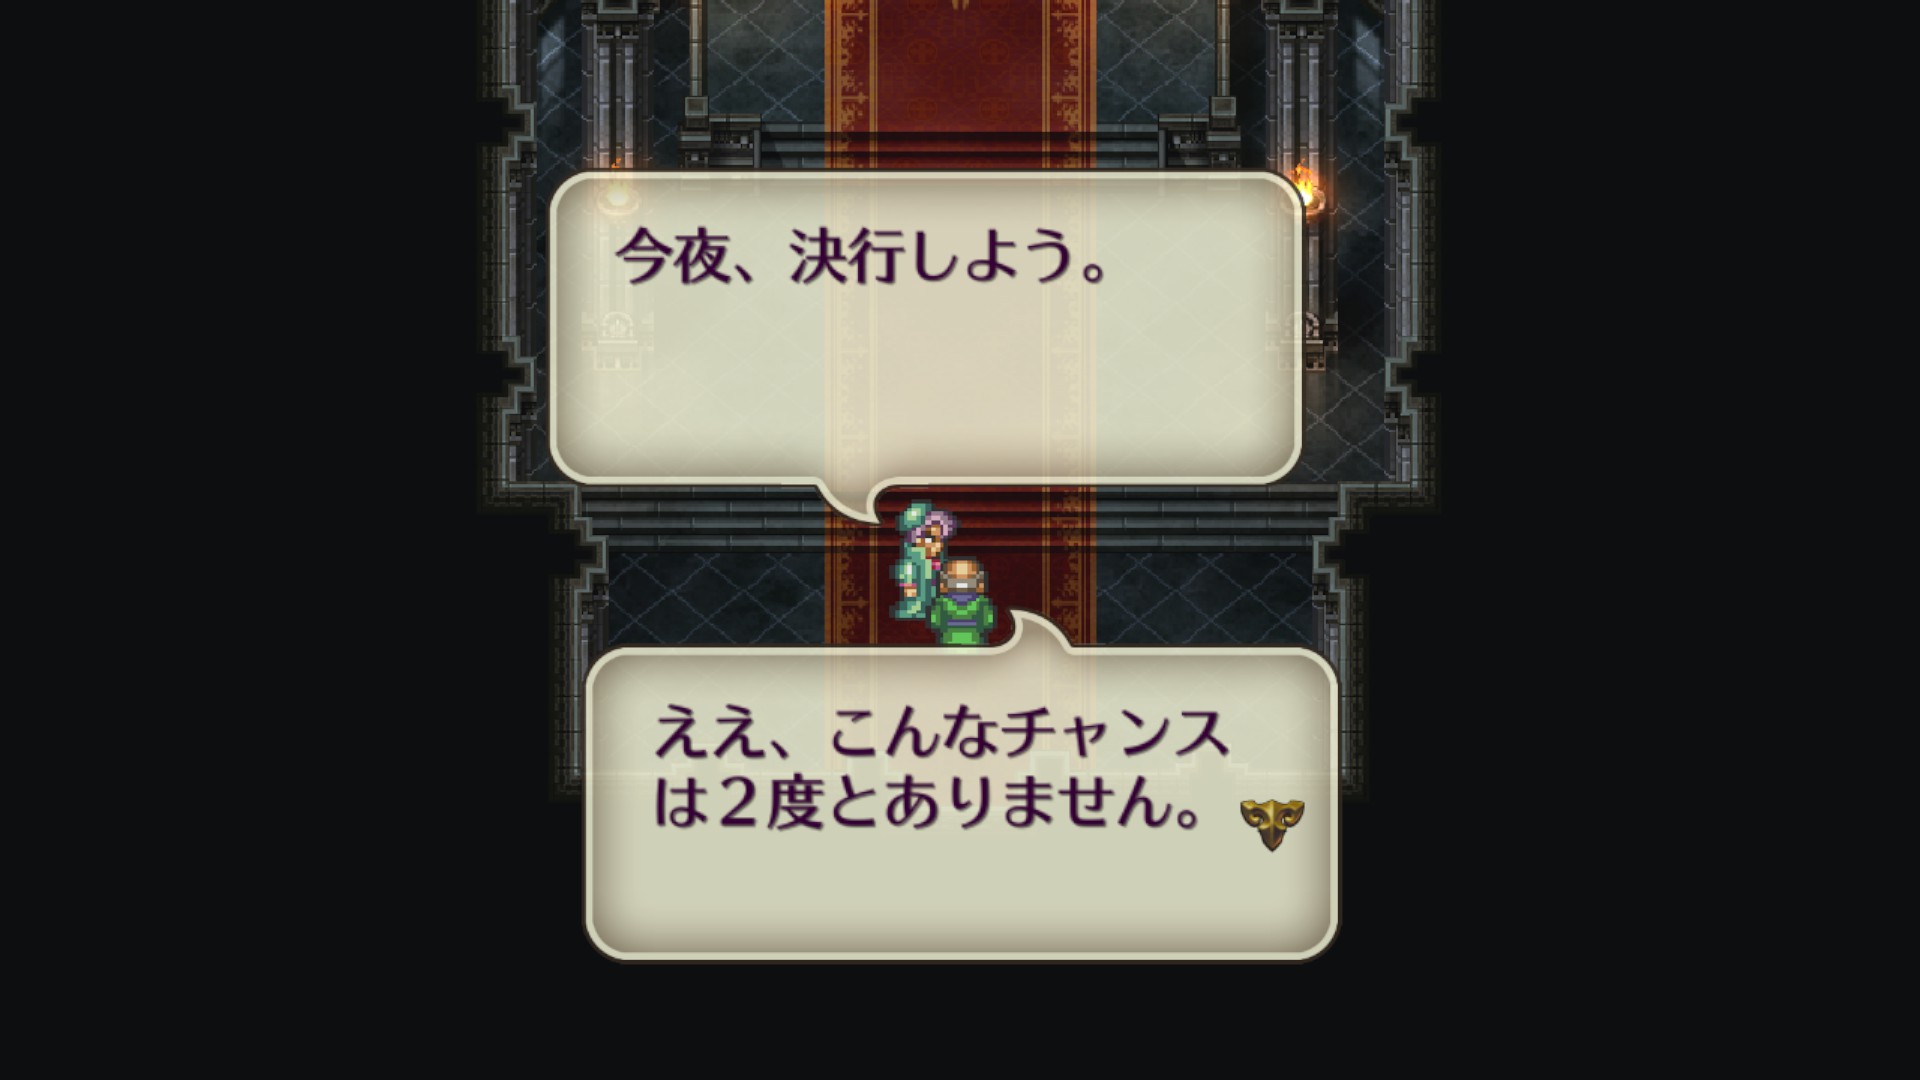 Two characters in a throne room, having a private conversation in Japanese